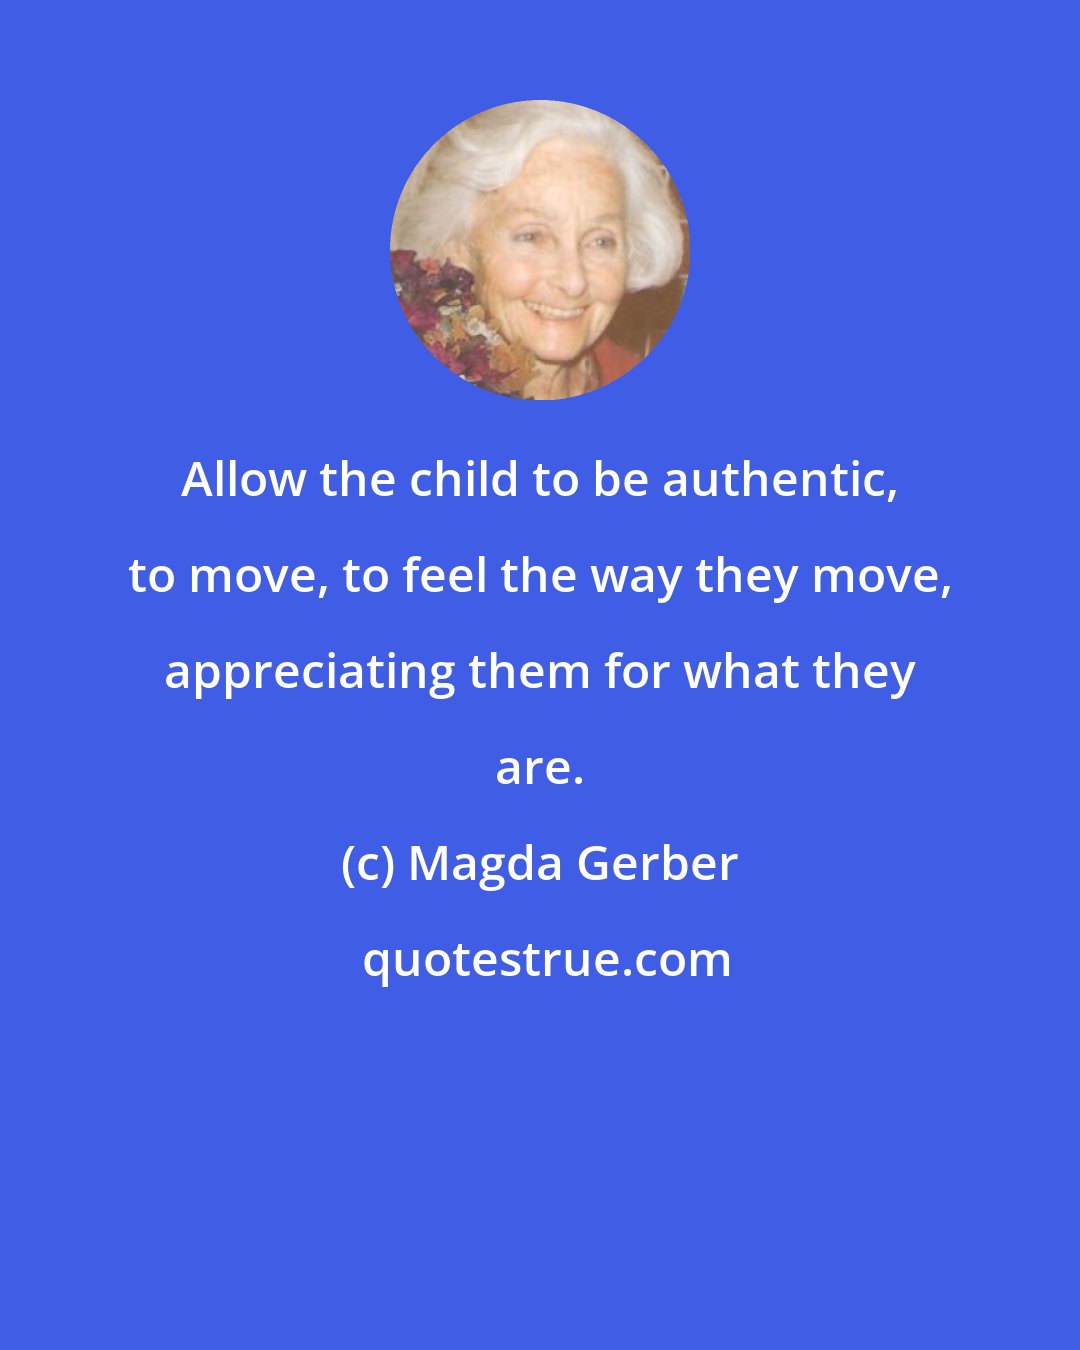 Magda Gerber: Allow the child to be authentic, to move, to feel the way they move, appreciating them for what they are.